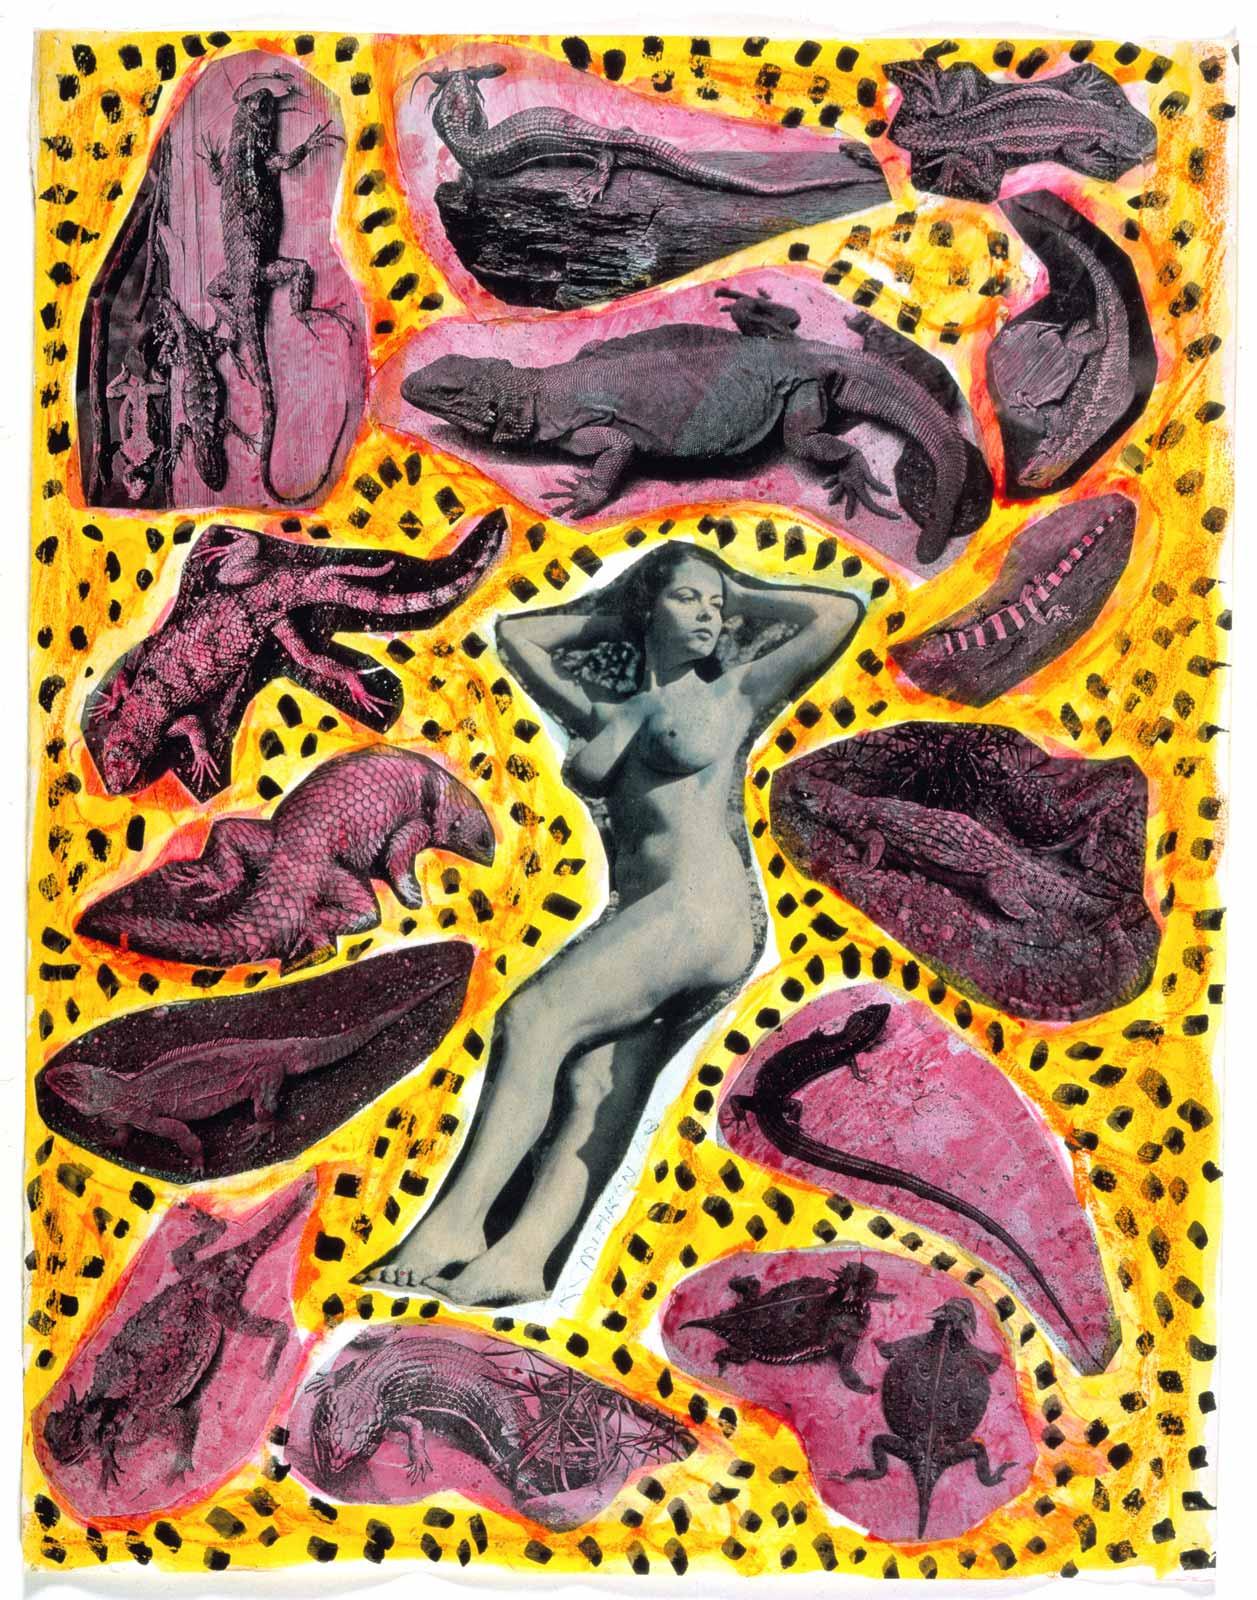 A drawing by Robert Smithson, Untitled, Venus with reptiles